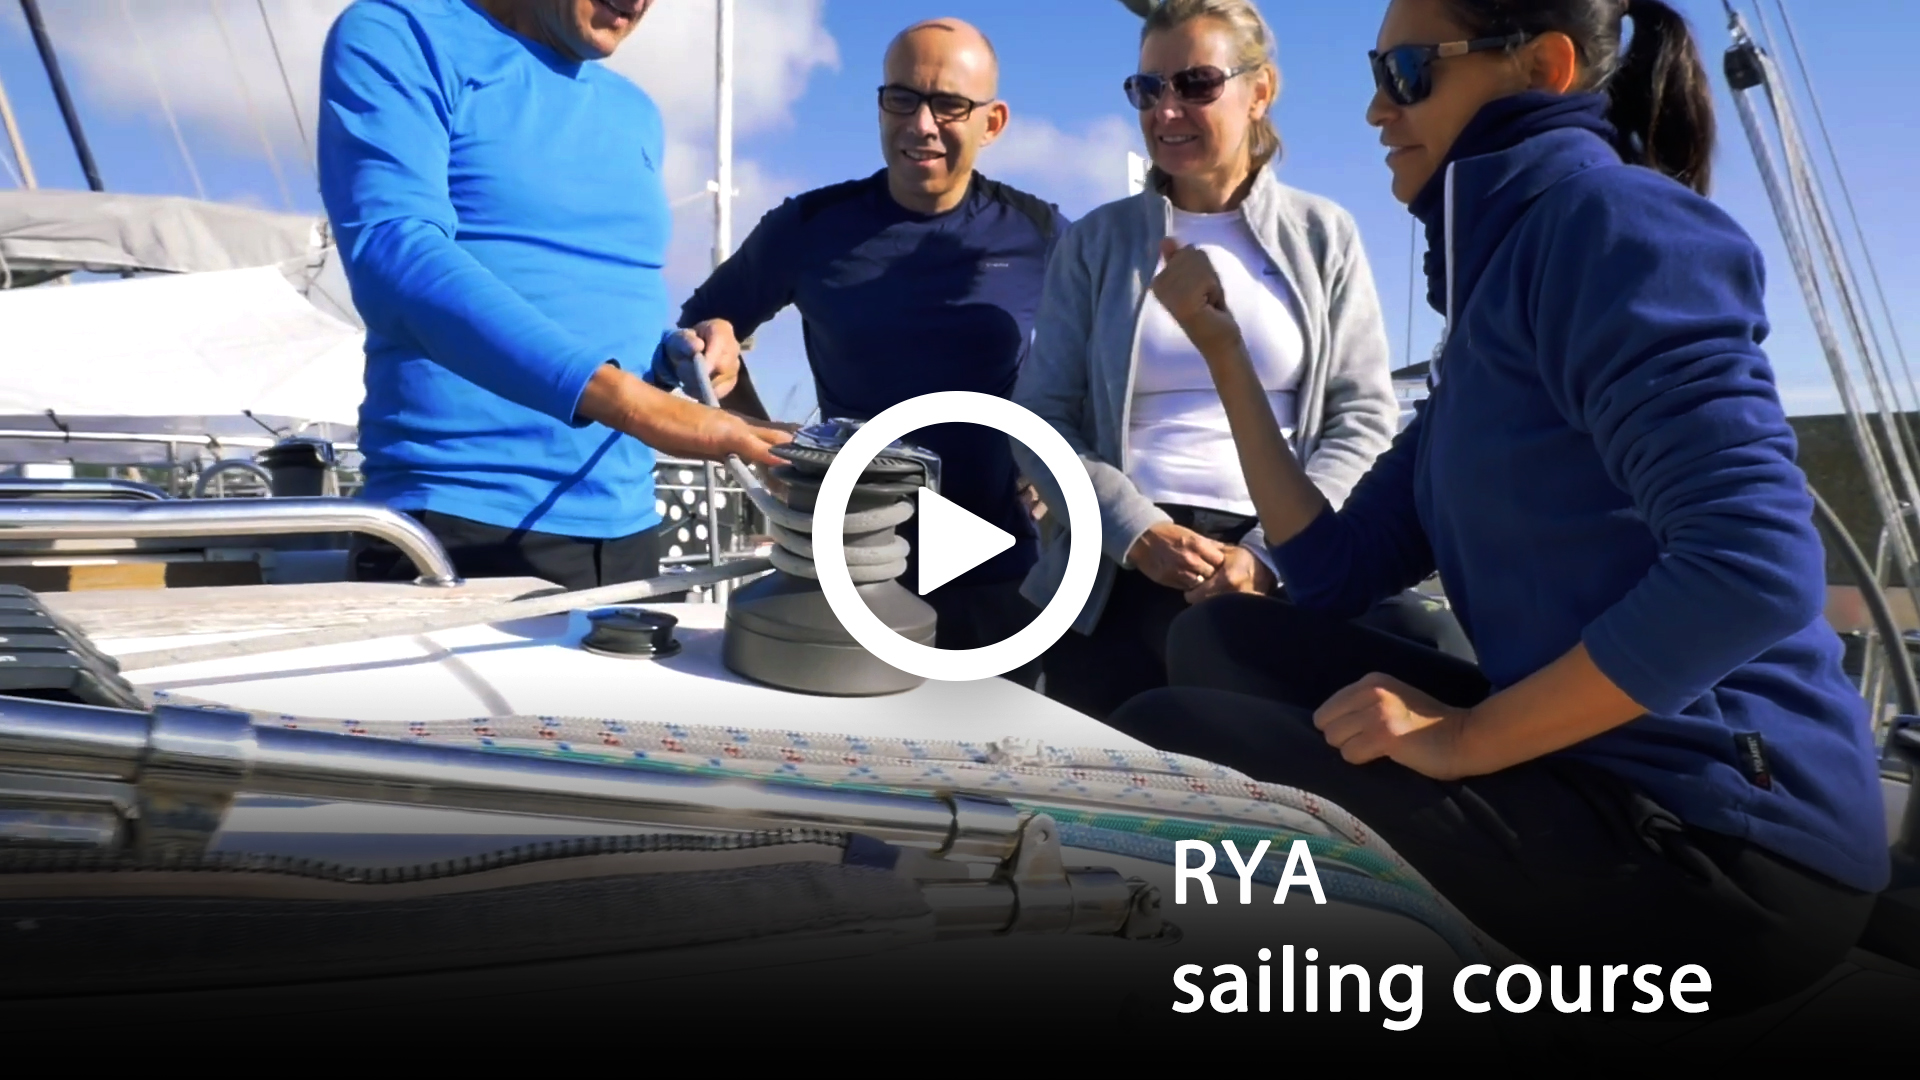 Sailing video to sale - RYA sailing course with Safe Sailing